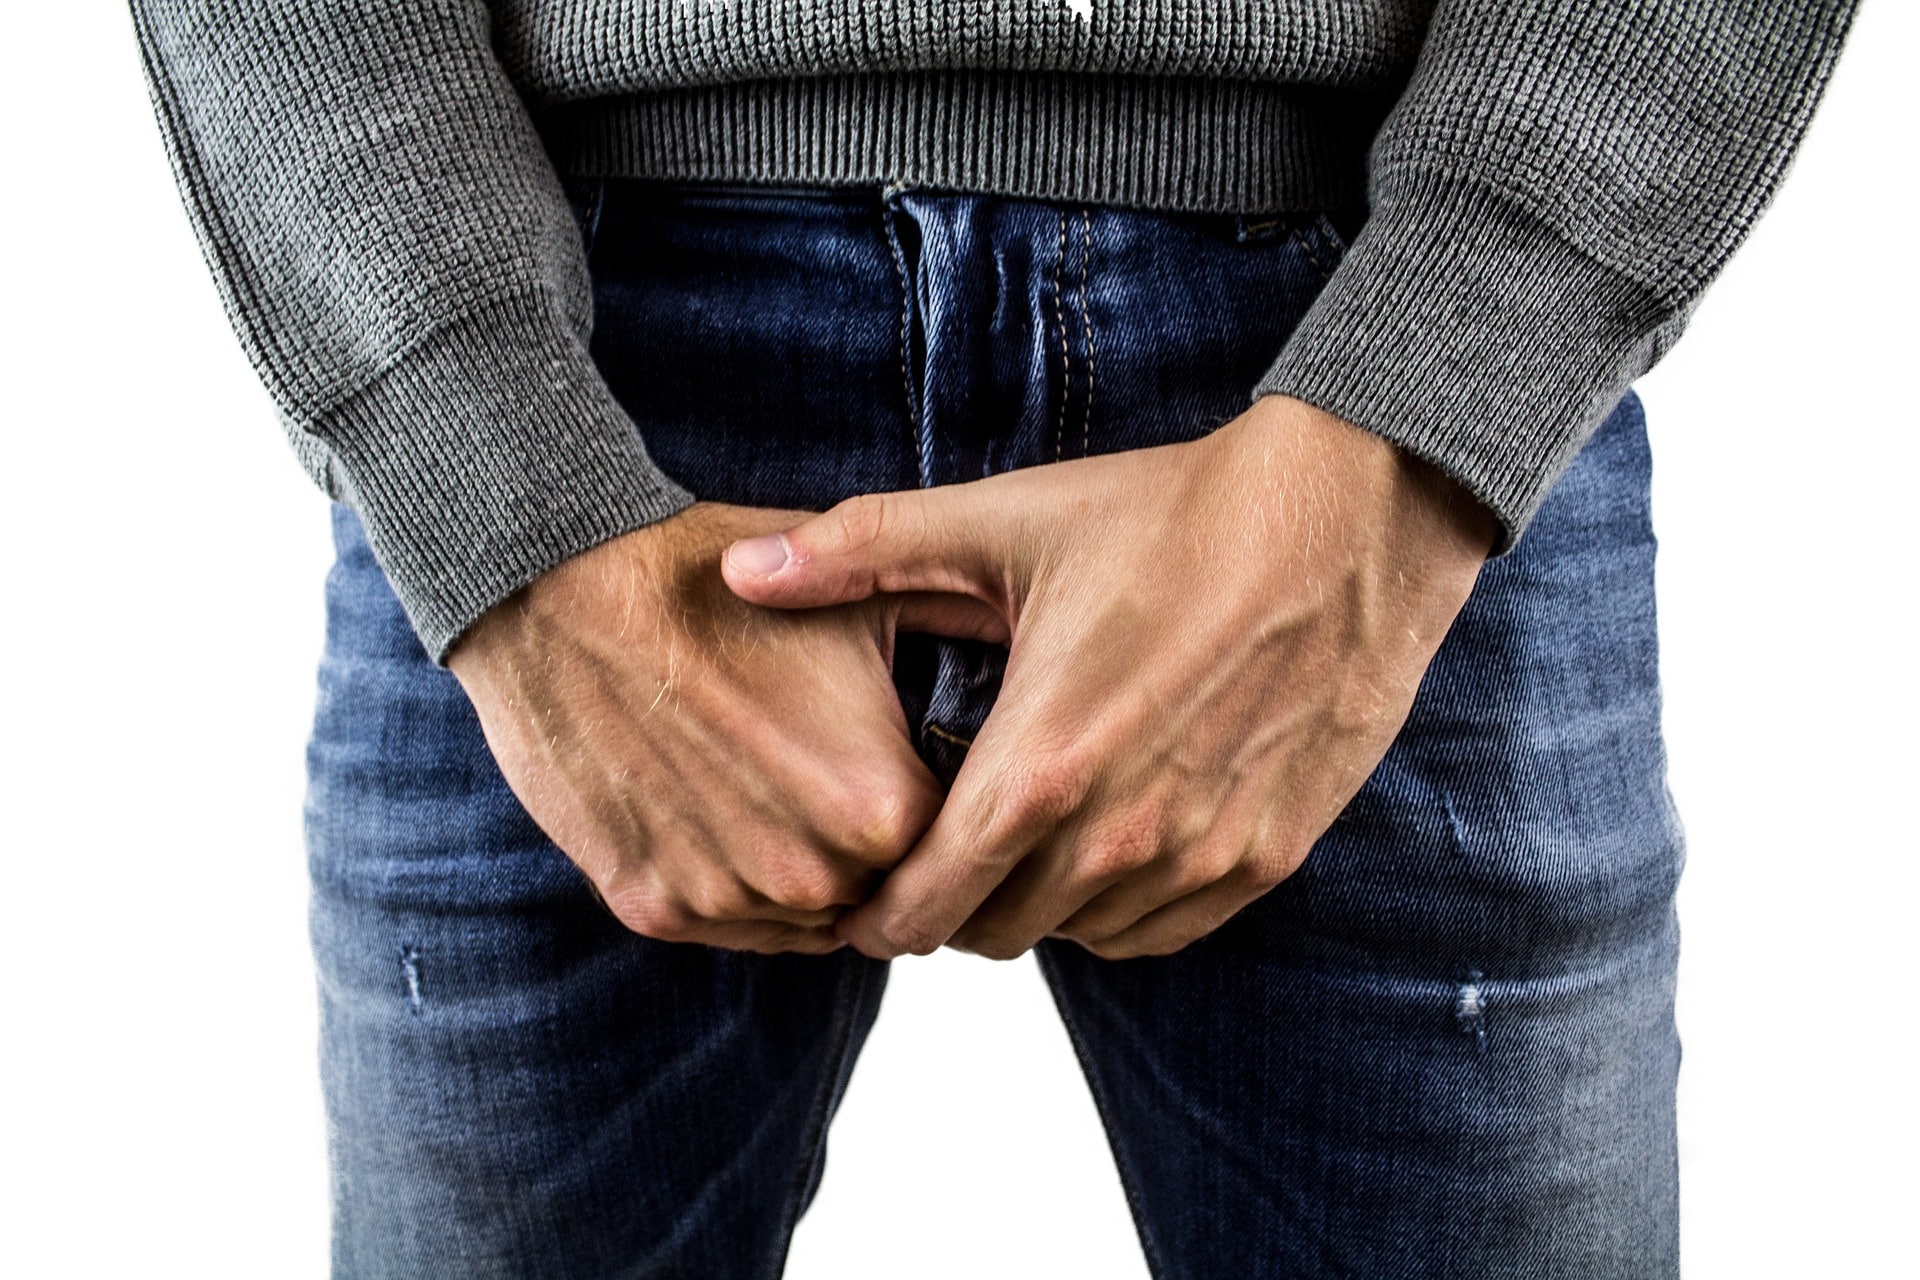 Testicular Cancer - man covering his groin with his hands